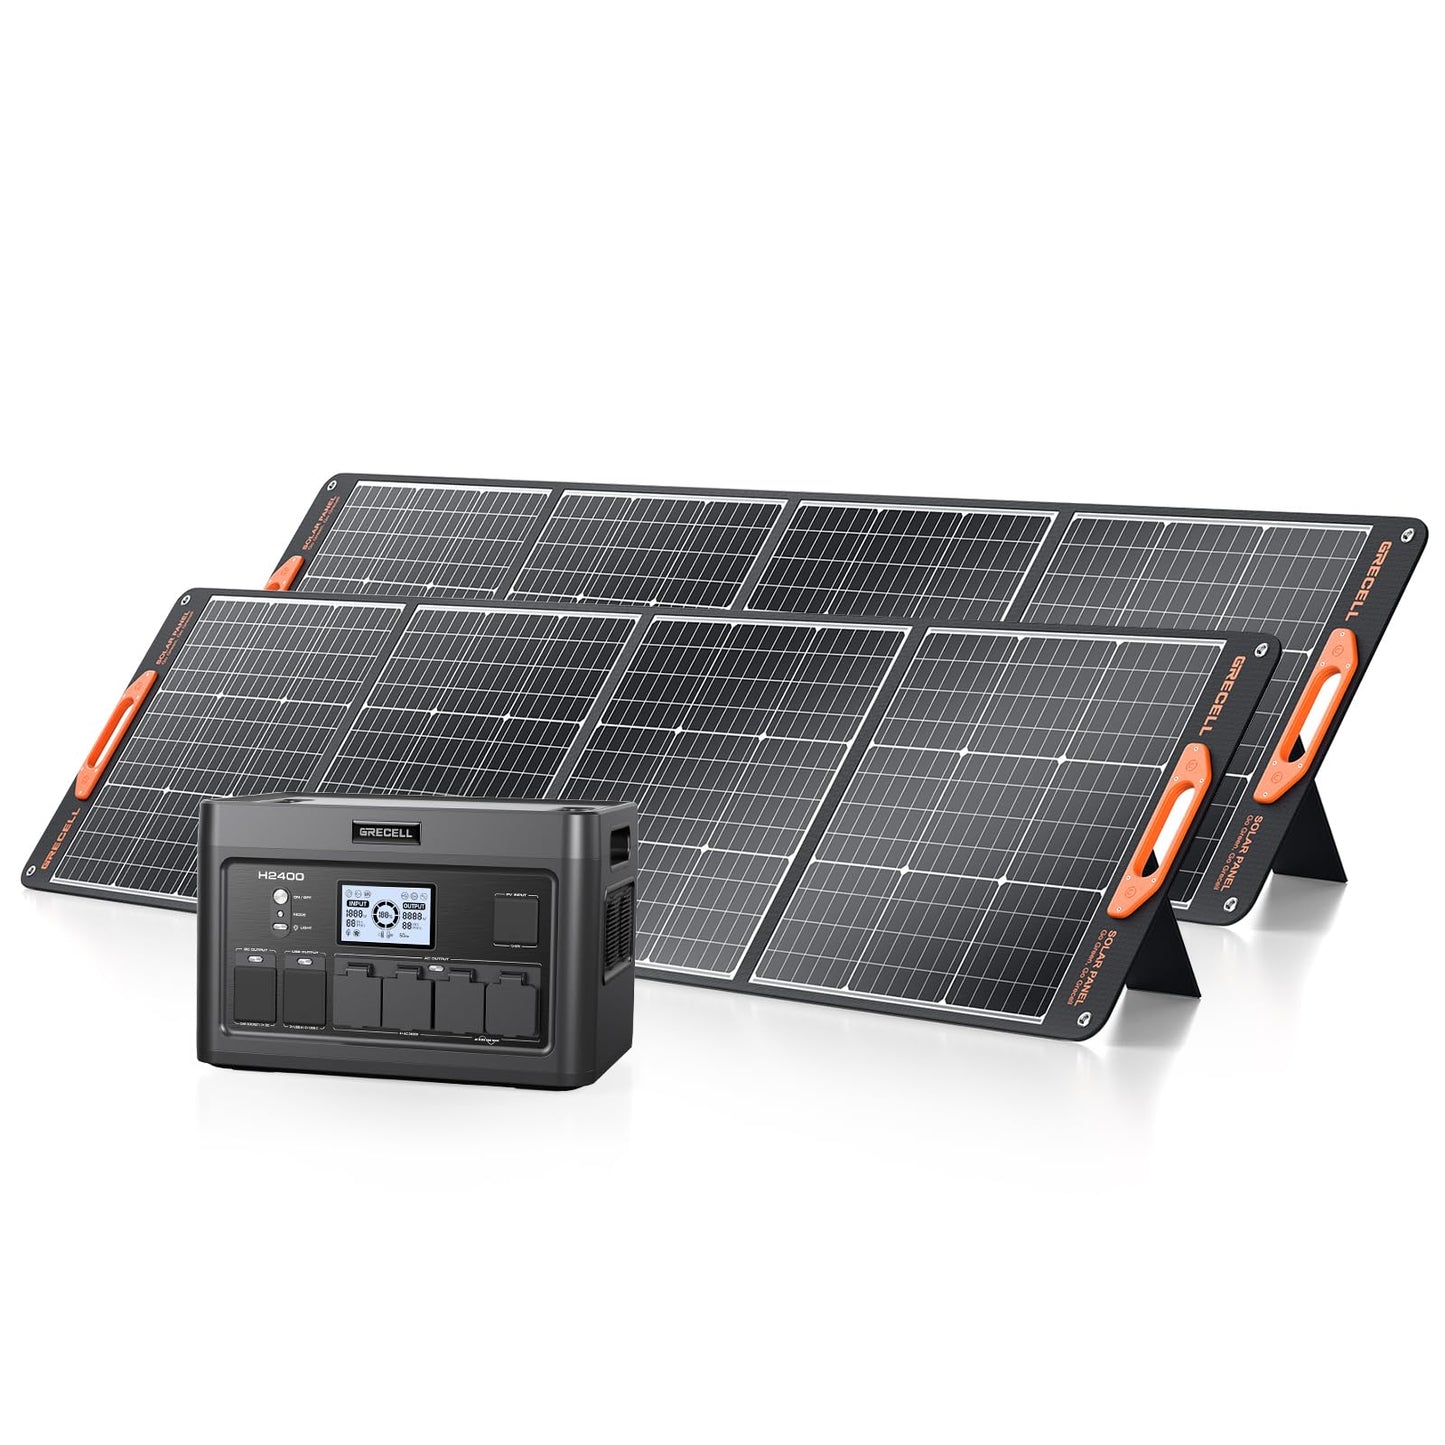 2400W Solar Generator with 2*200W Flexible Solar Panel, GRECELL 1843Wh Portable Power Station w/ 2400W(4800W Peak)4 AC Outlets, Fast Charging Emergency Power Backup Battery UPS for Home Outage RV/Van